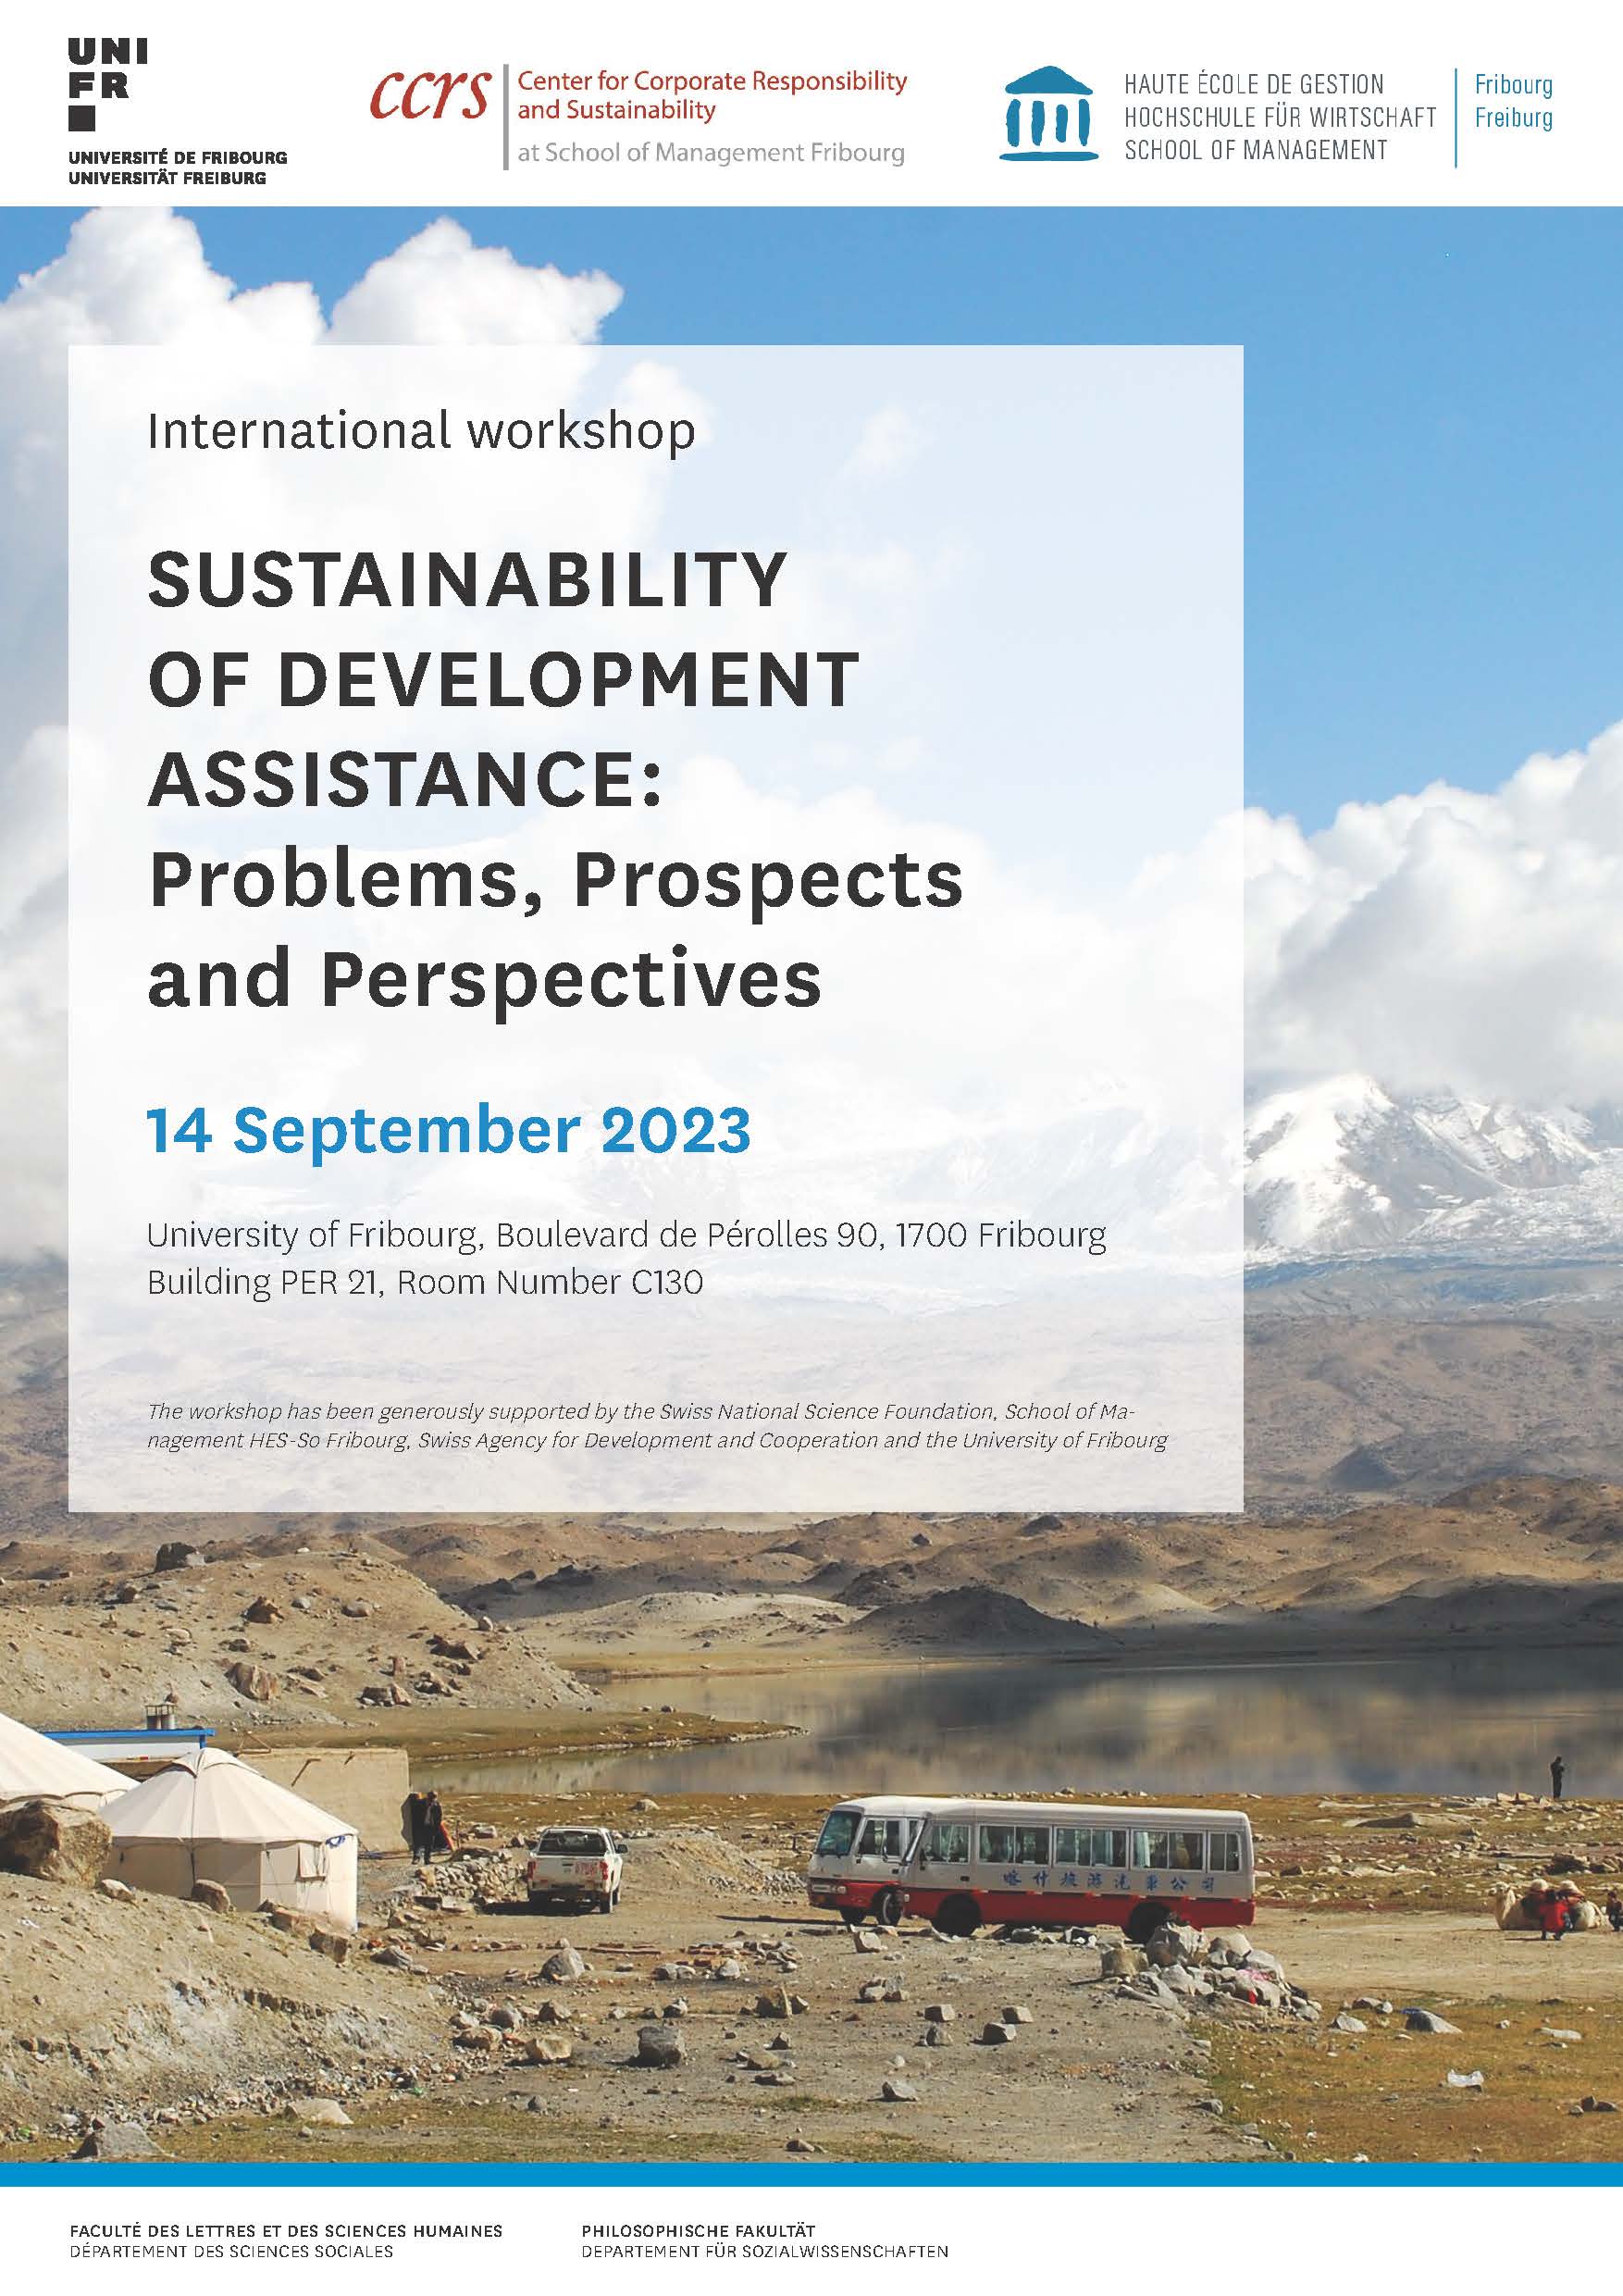 Poster for international workshop "Sustainability of Development Assistance: Problems, Prospects and Perspectives"